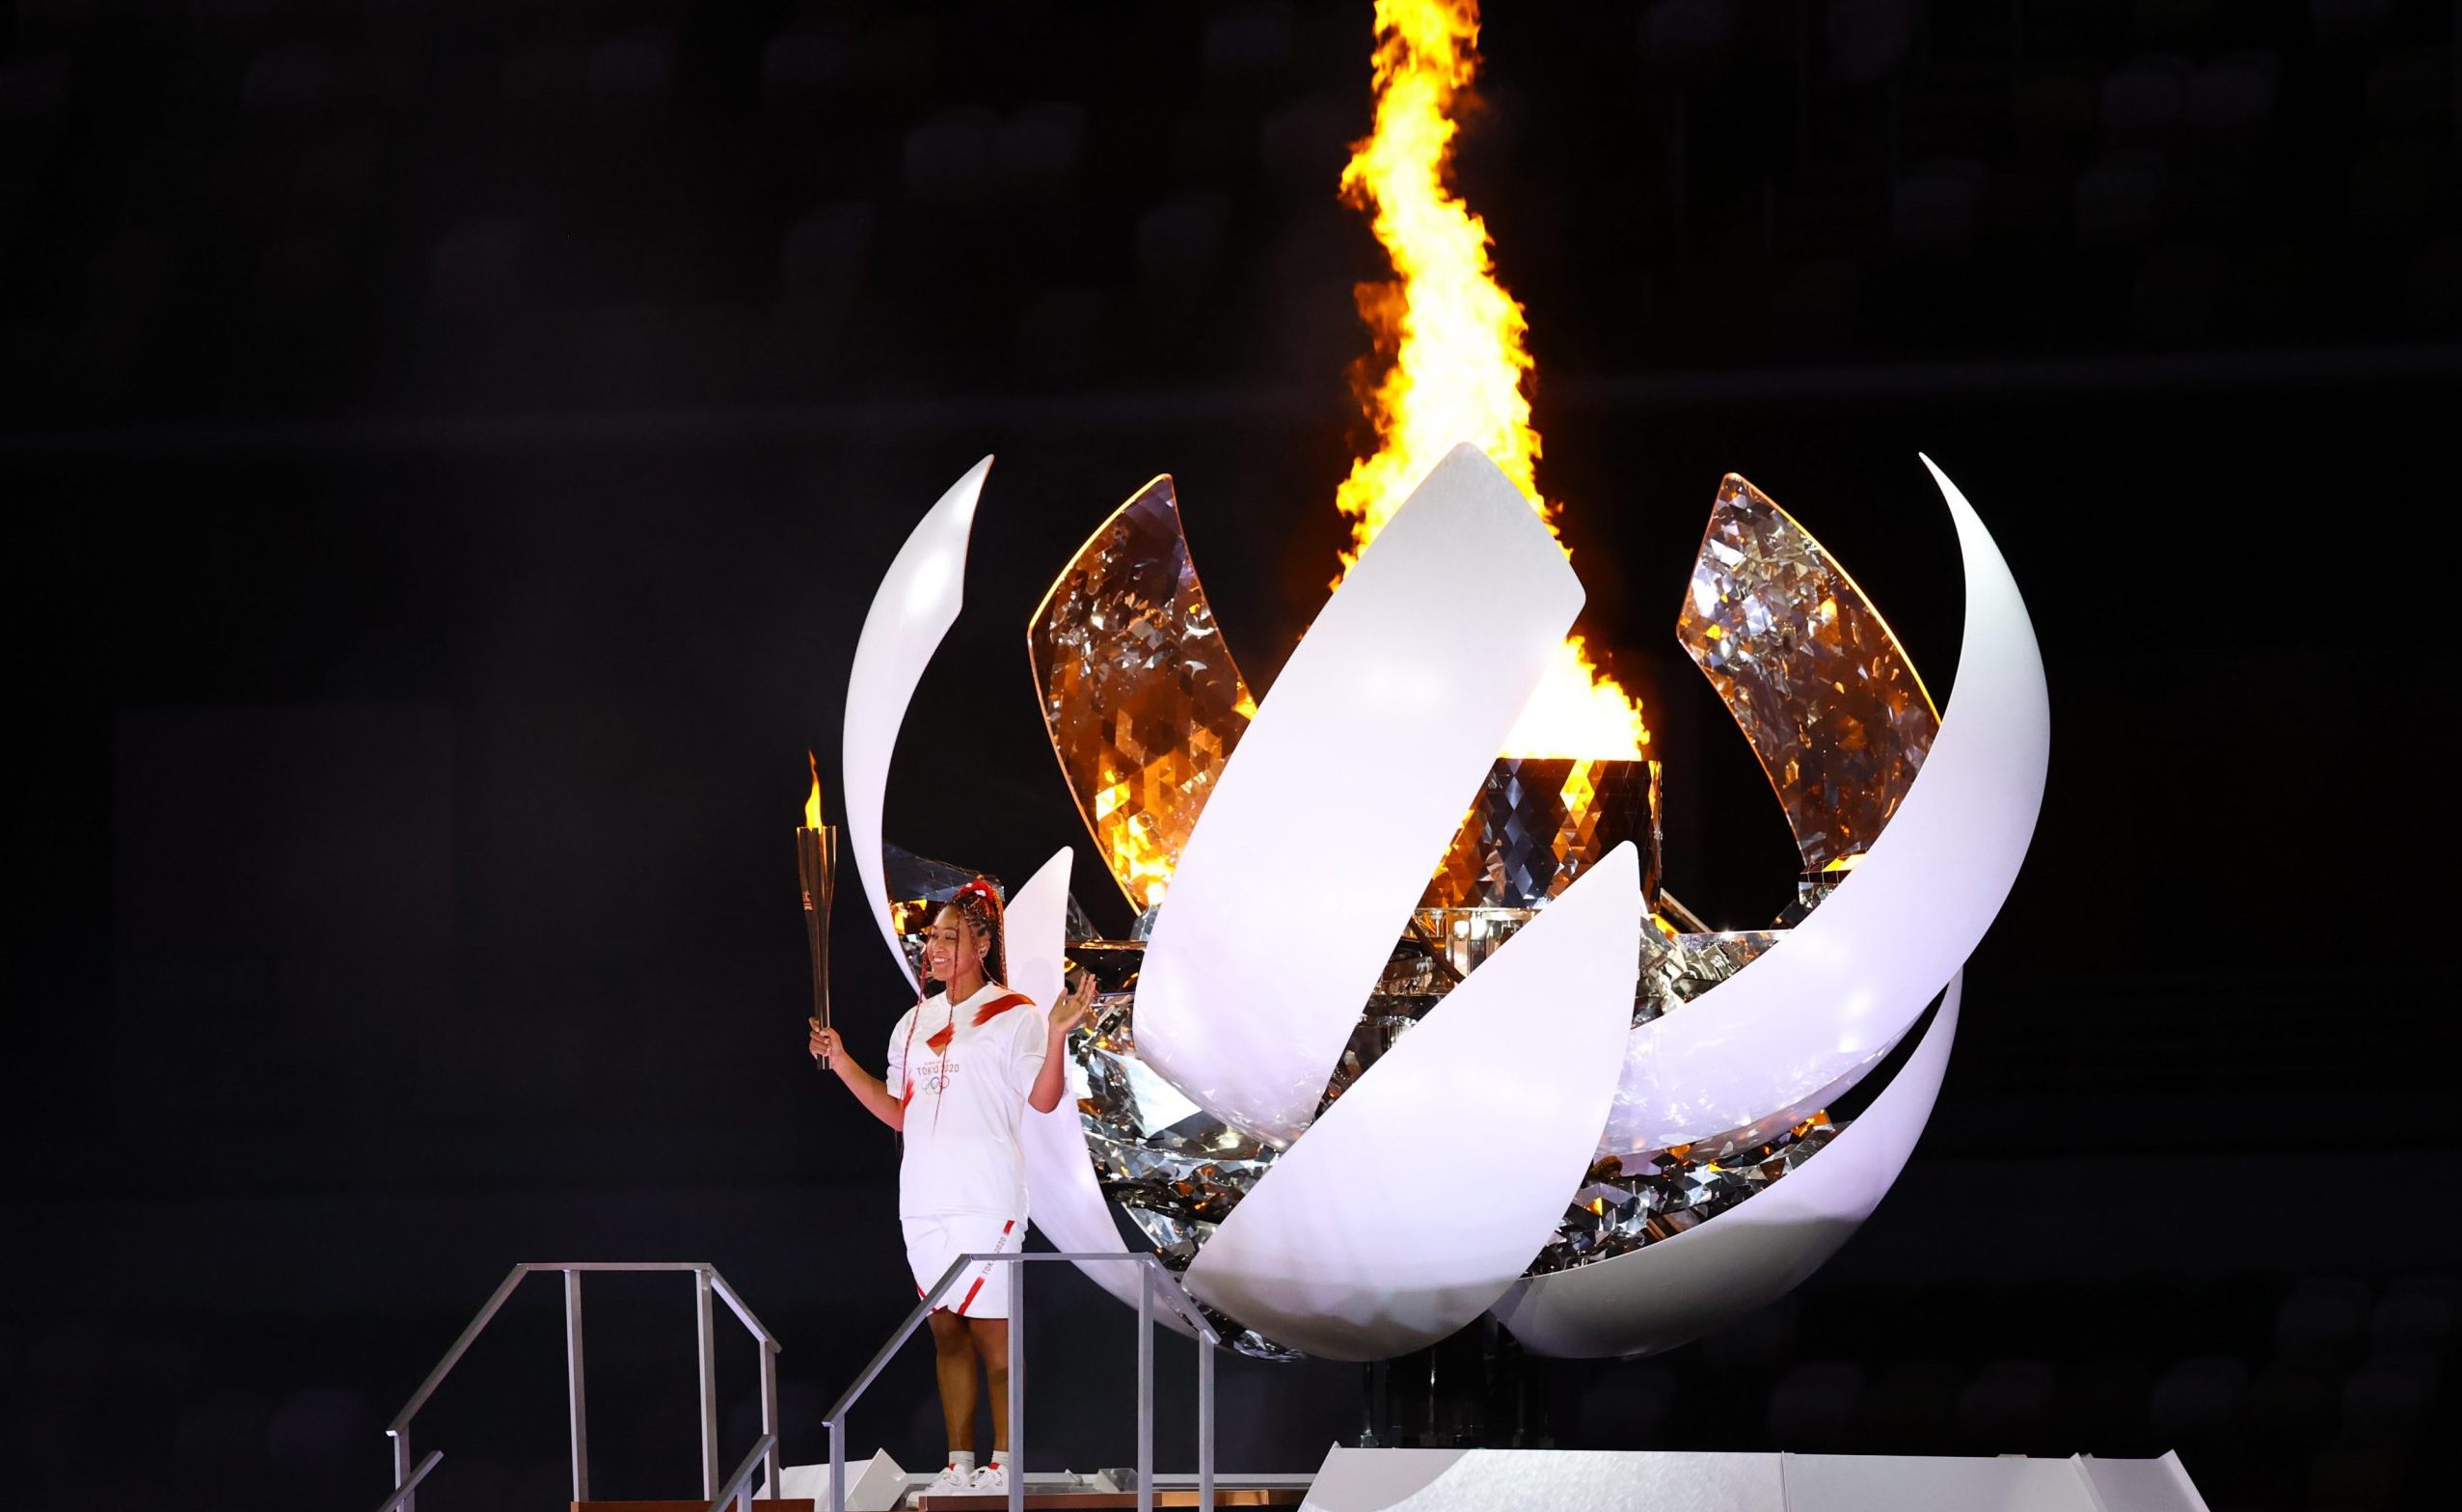 China boasts its tech at the Olympic Games opening ceremony - Protocol